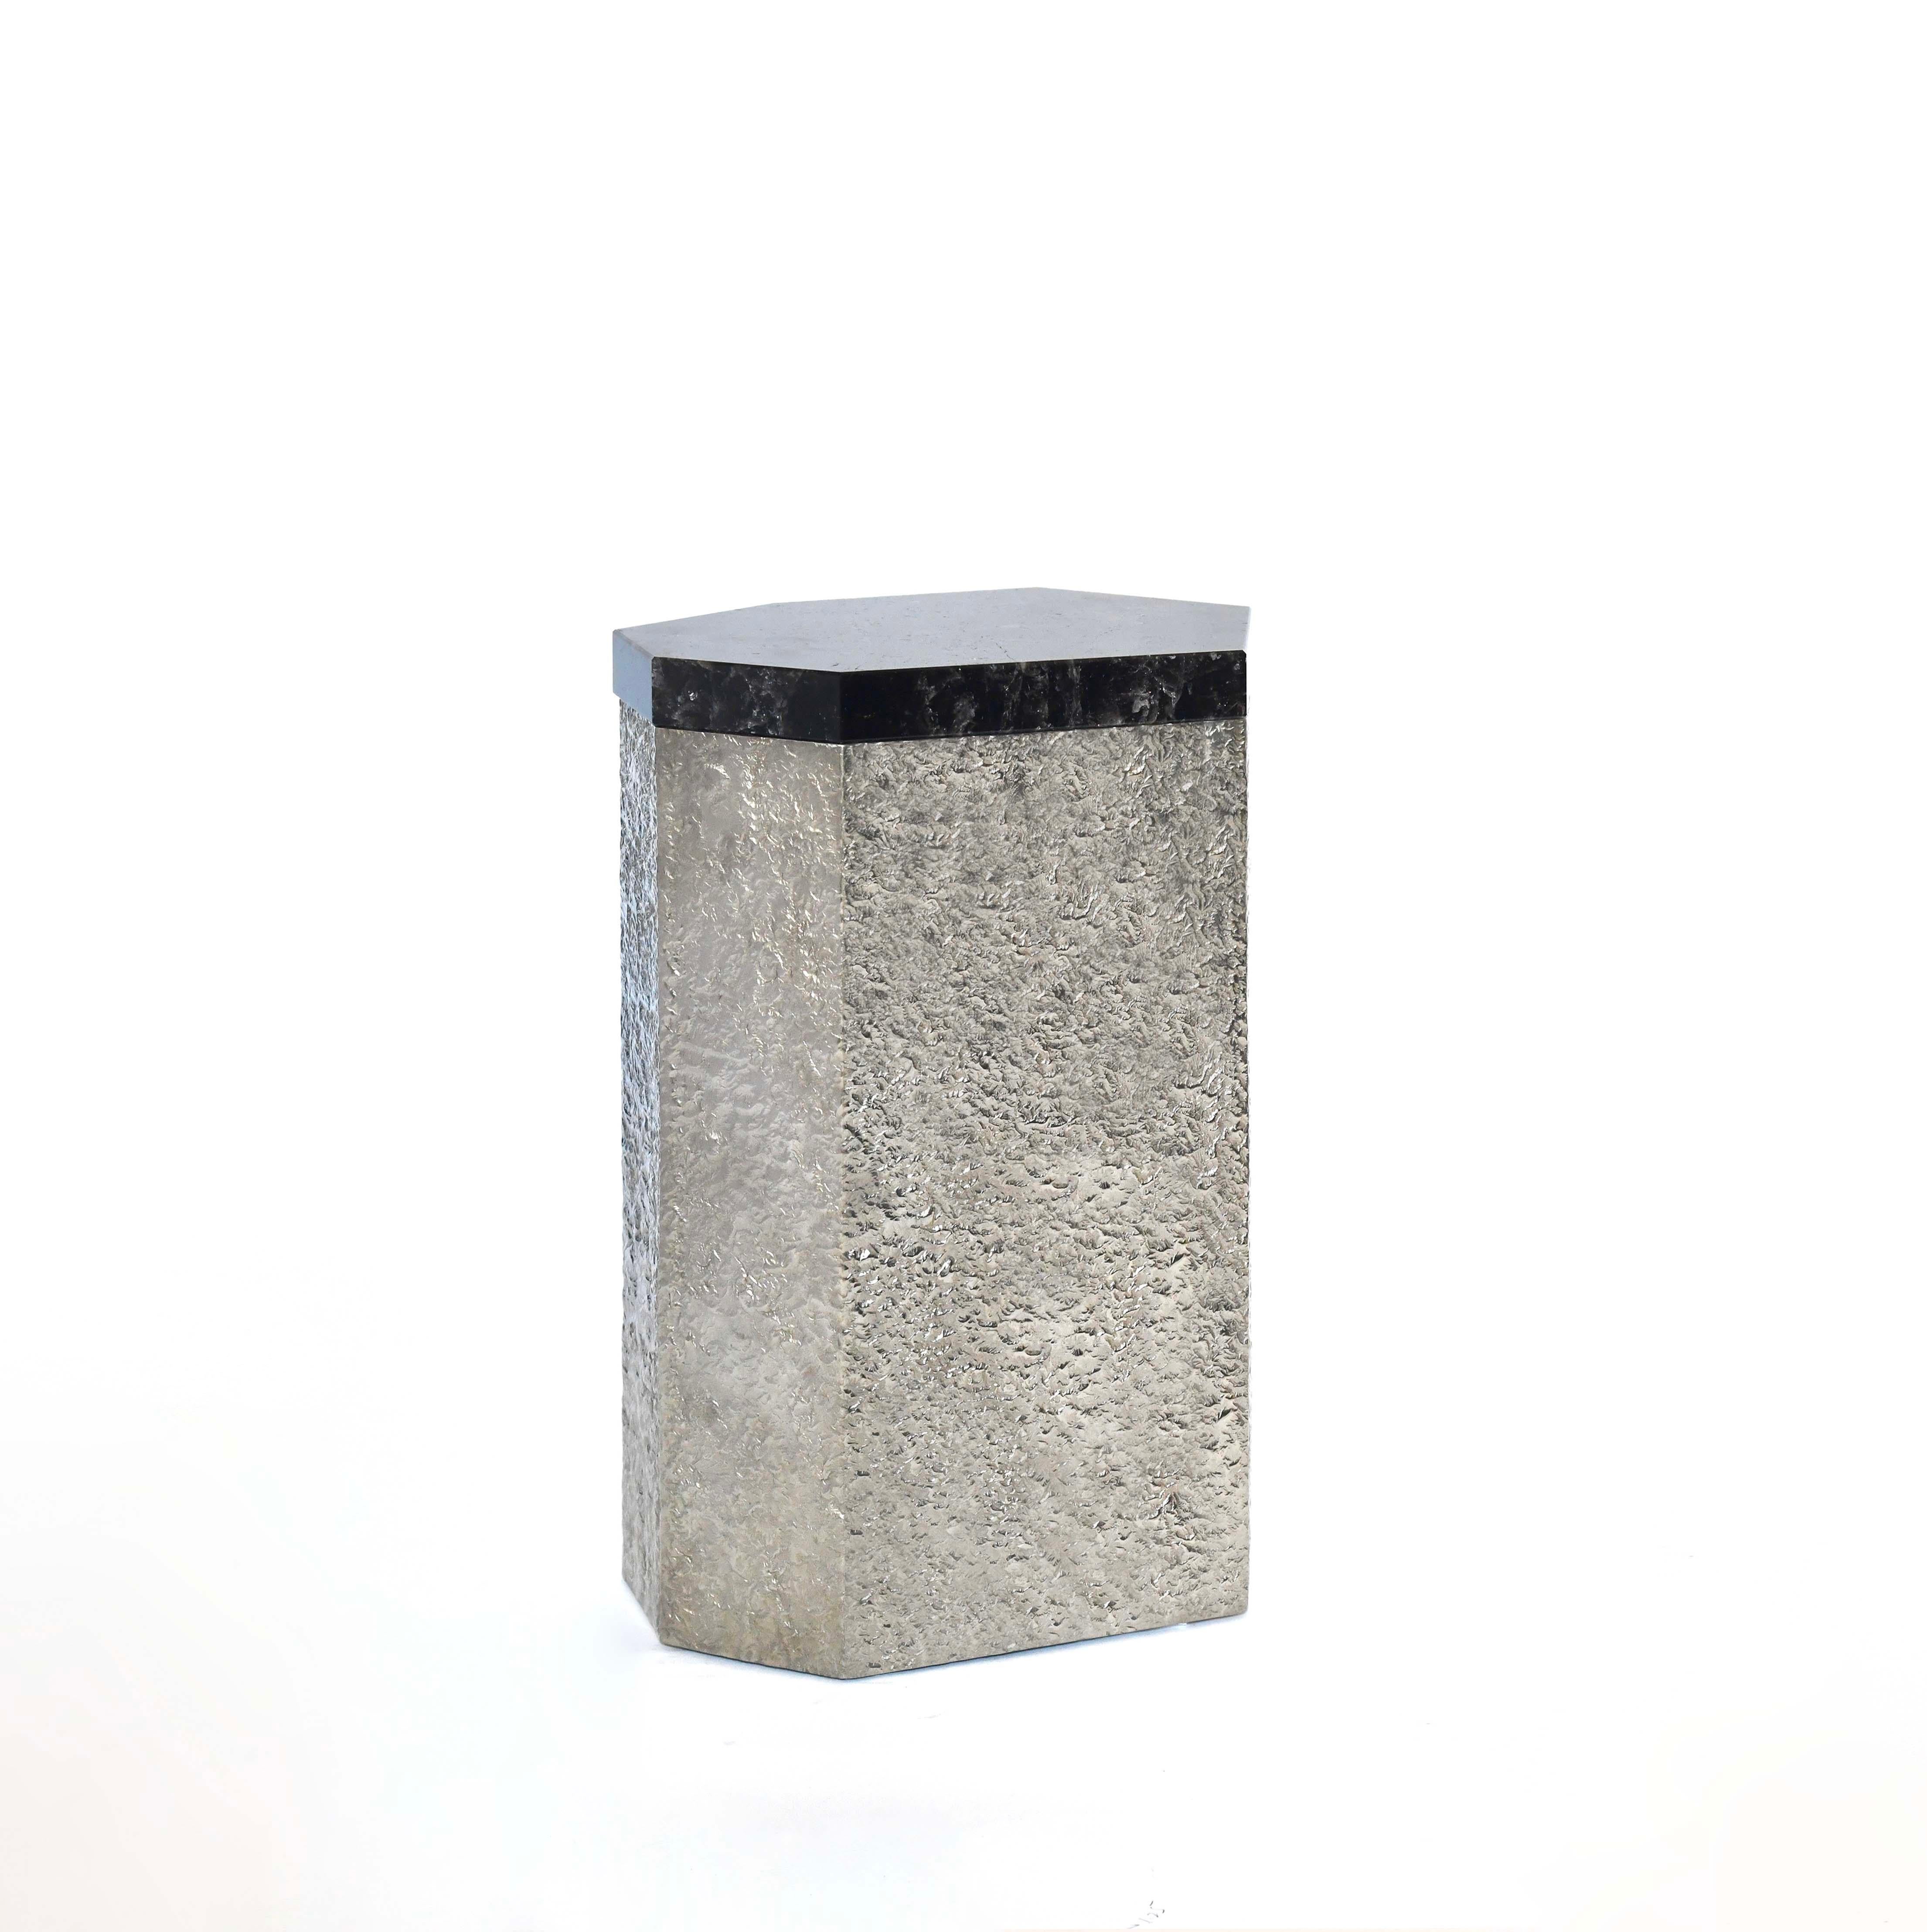 Elegant form rock crystal side table created by Phoenix Gallery, NYC. Hammered nickel base with dark smoky rock crystal quartz top.
Custom size, quantity, and finish upon request.